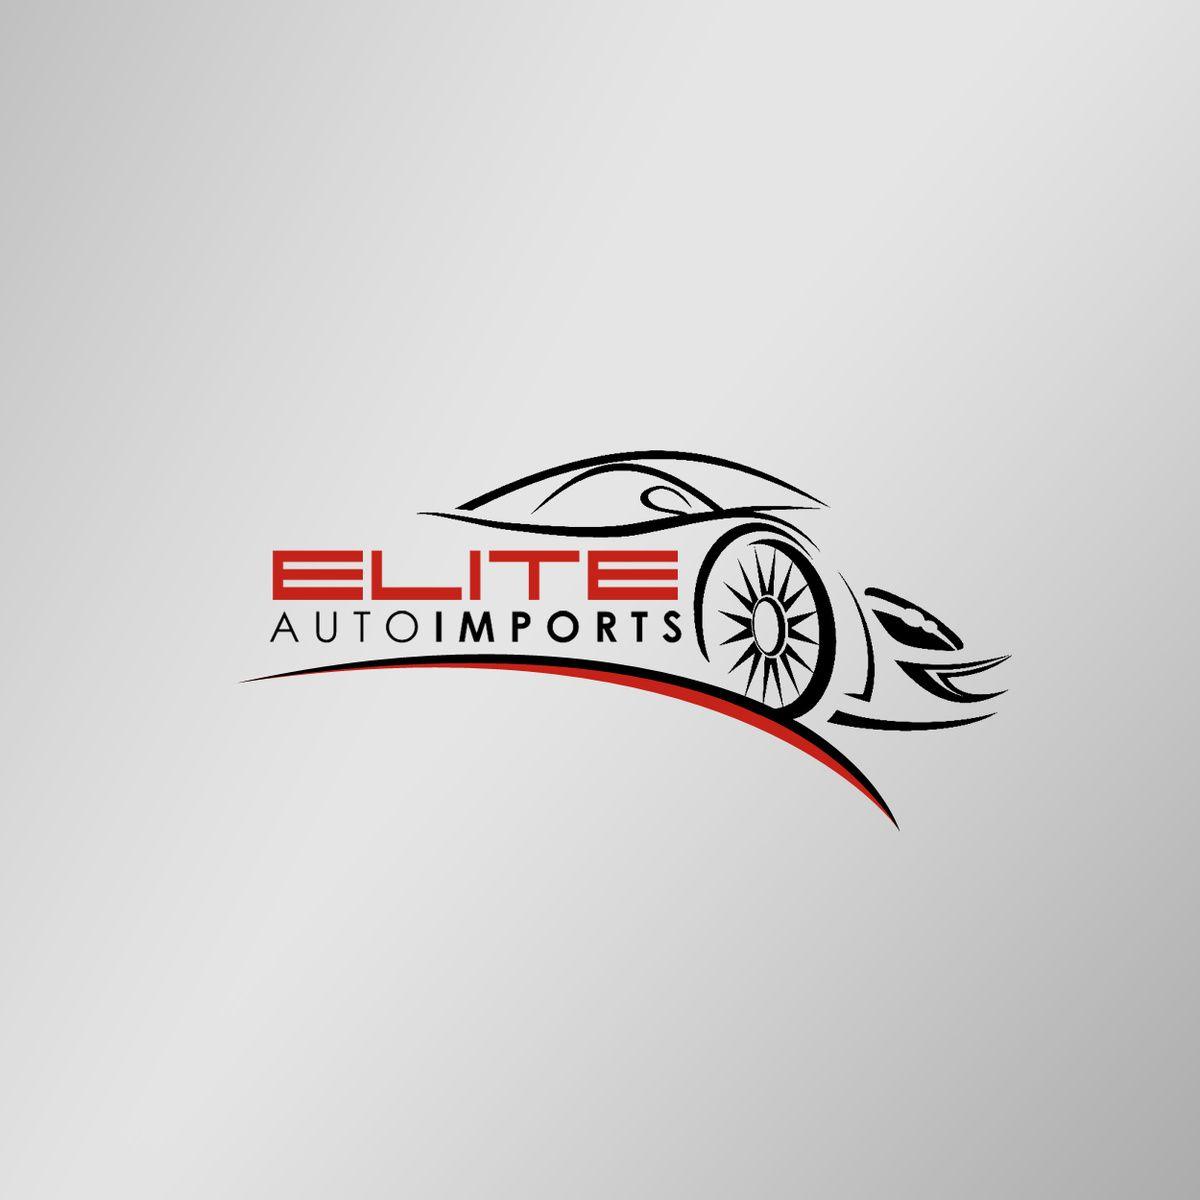 Automotive Import Logo - Elite Auto Imports, CA: Read Consumer reviews, Browse Used